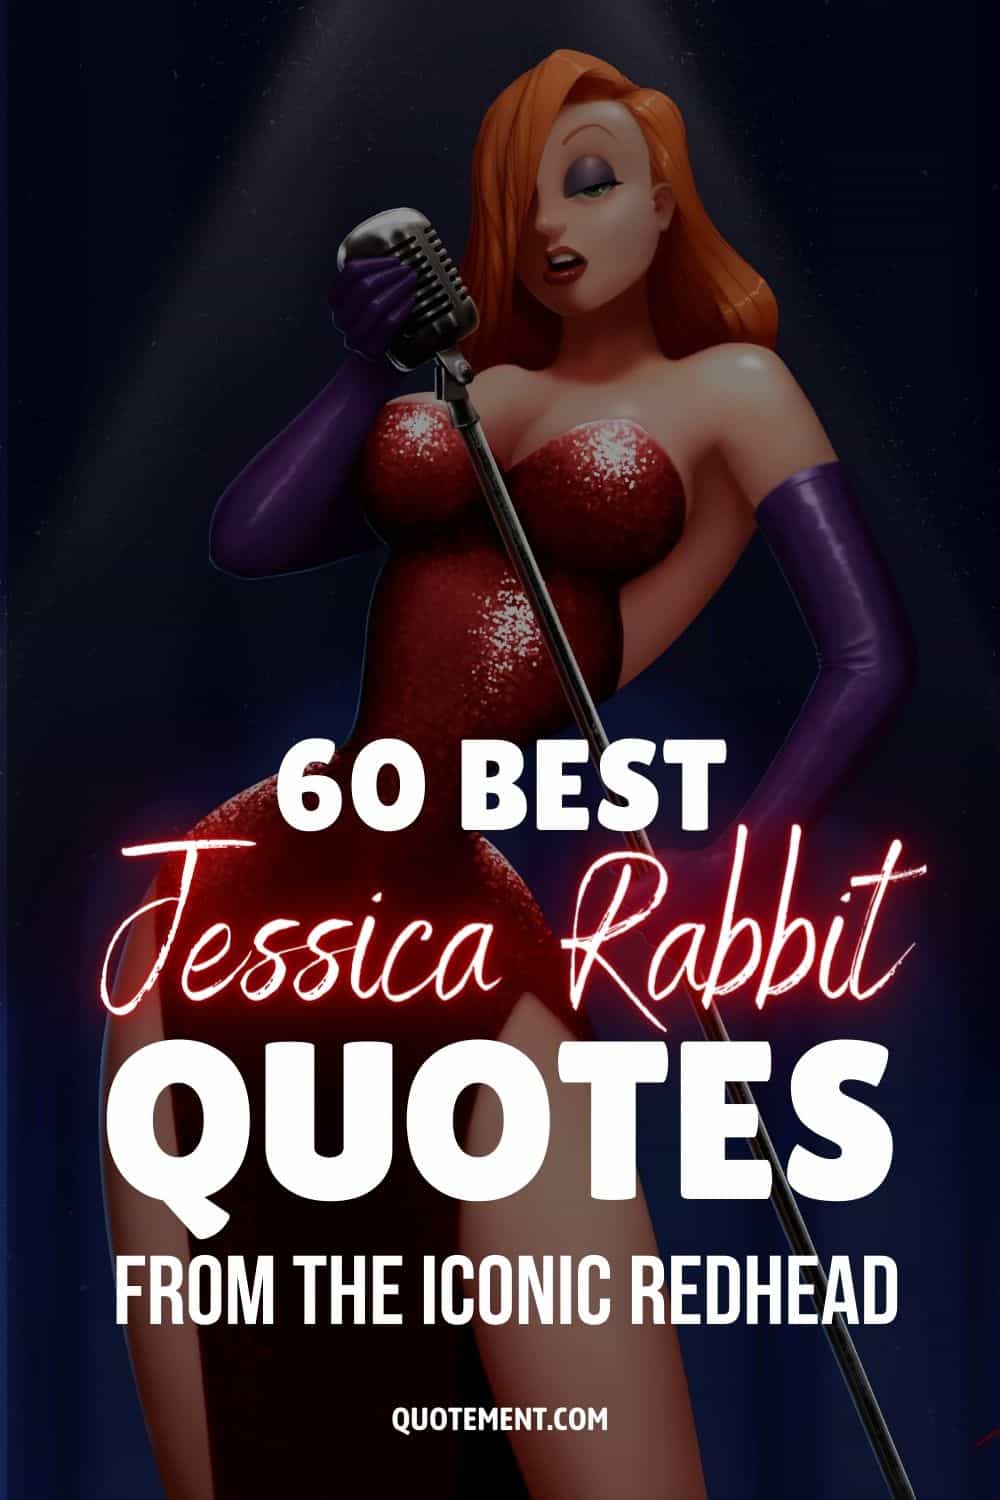 60 Best Jessica Rabbit Quotes From The Legendary Redhead
